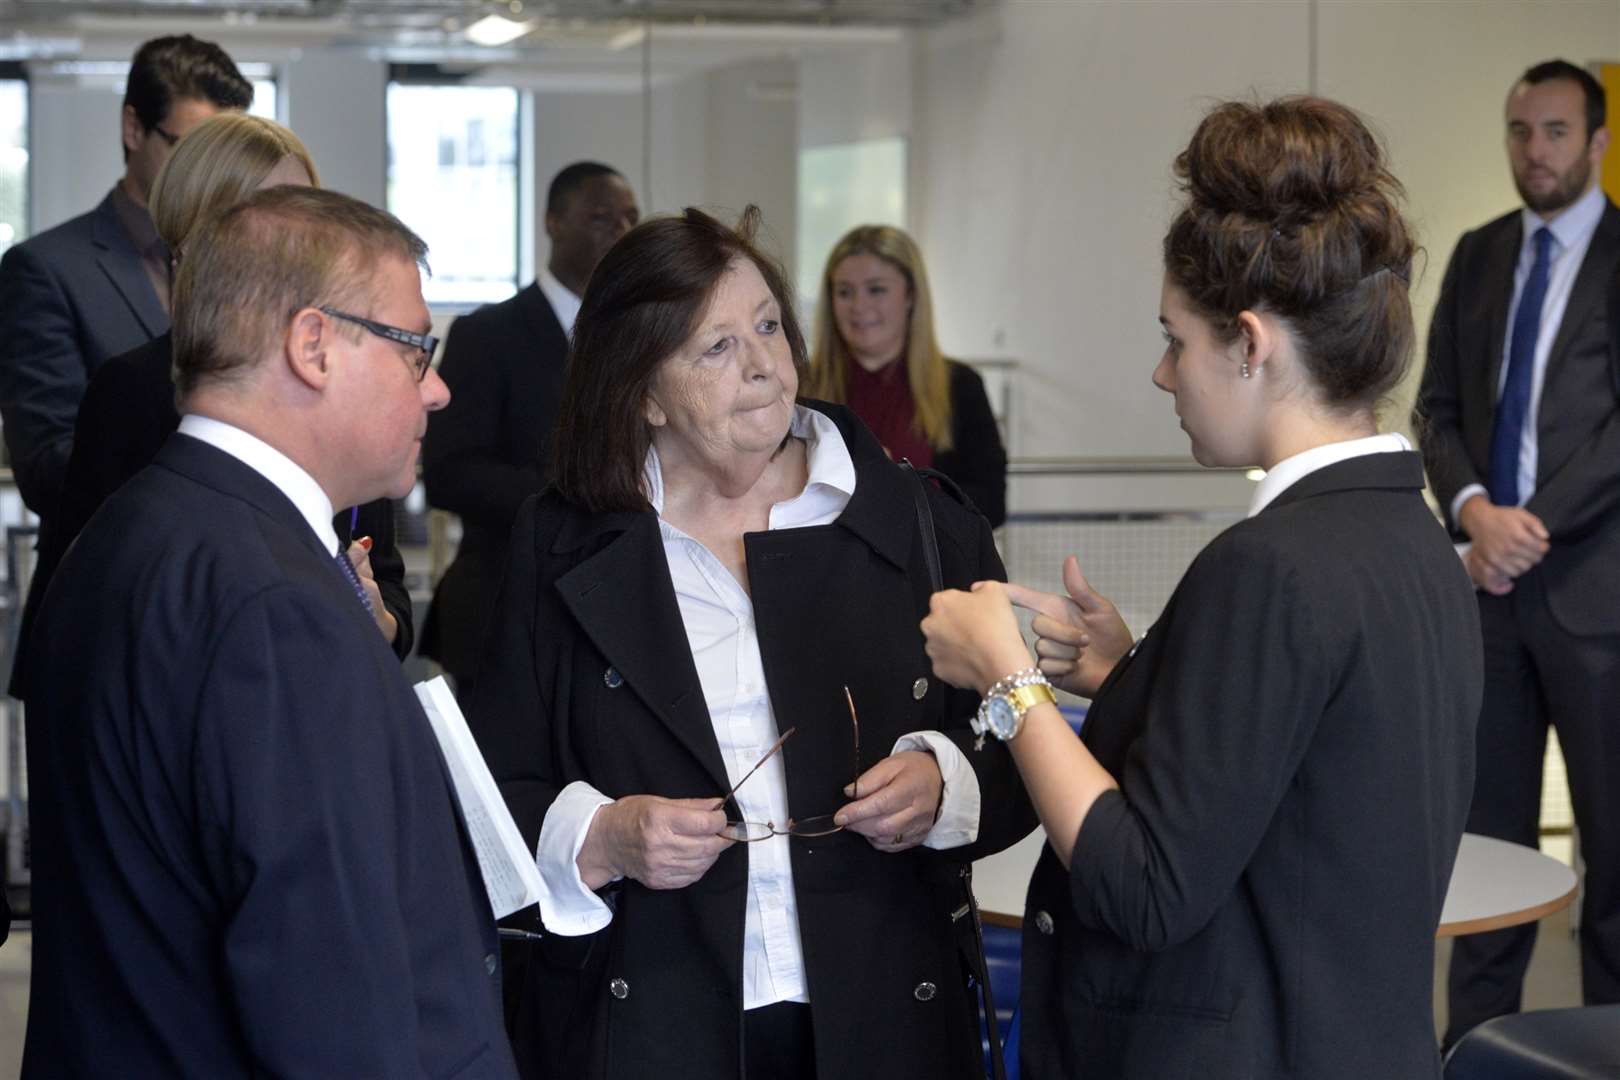 Minister Mark Francis and Medway Council's Jane Chitty talk to a student